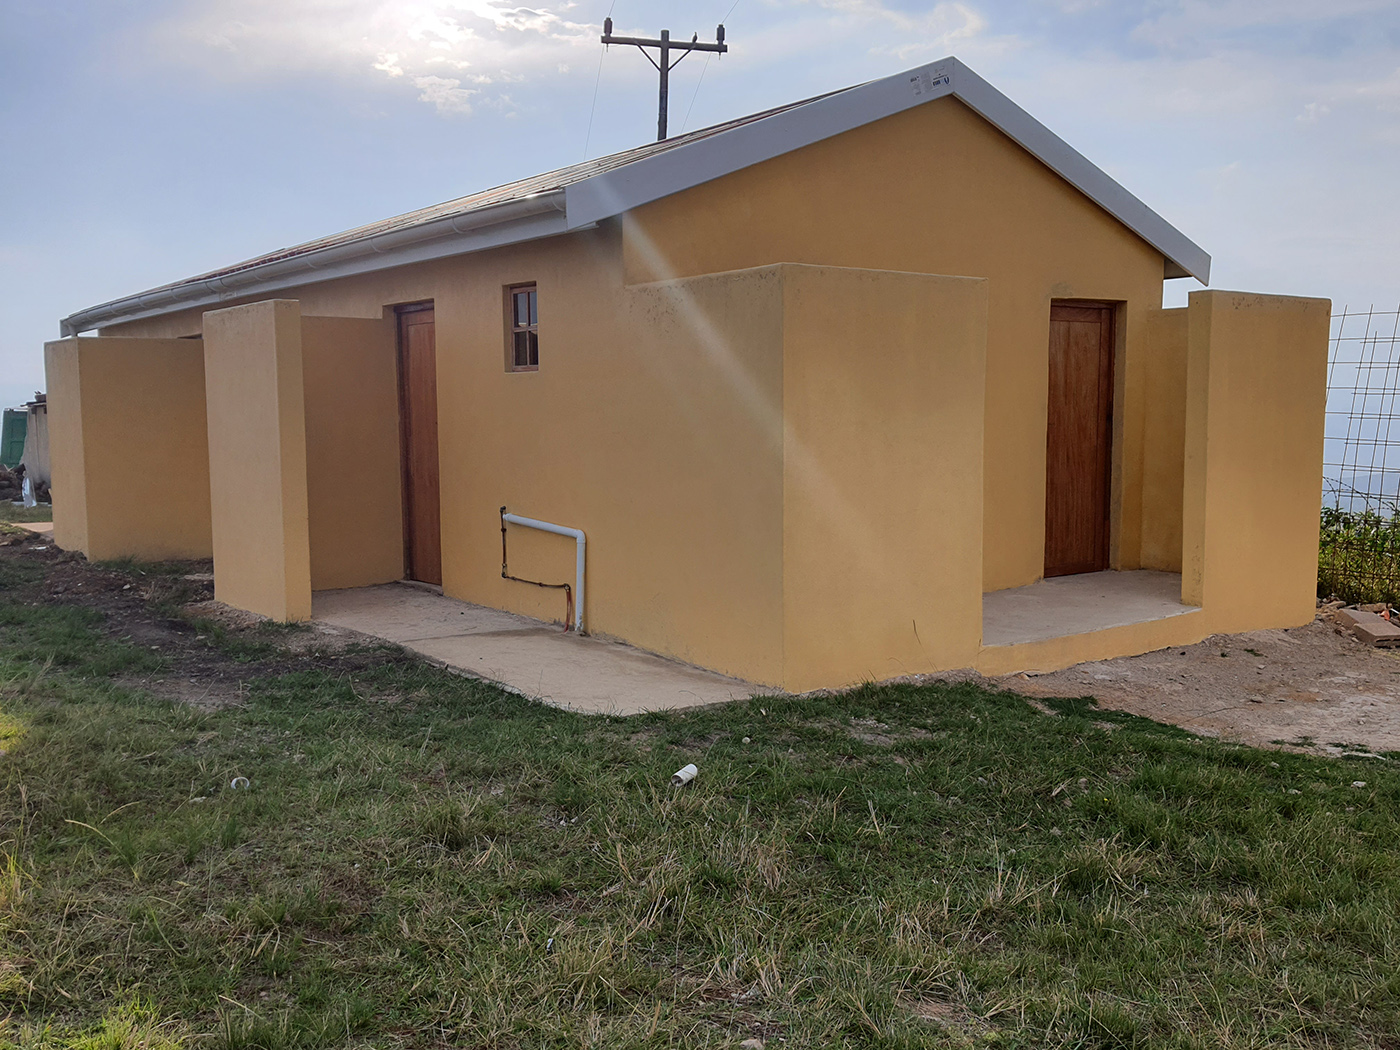 Khanyisani Senior Primary now has new toilets for learners and teachers